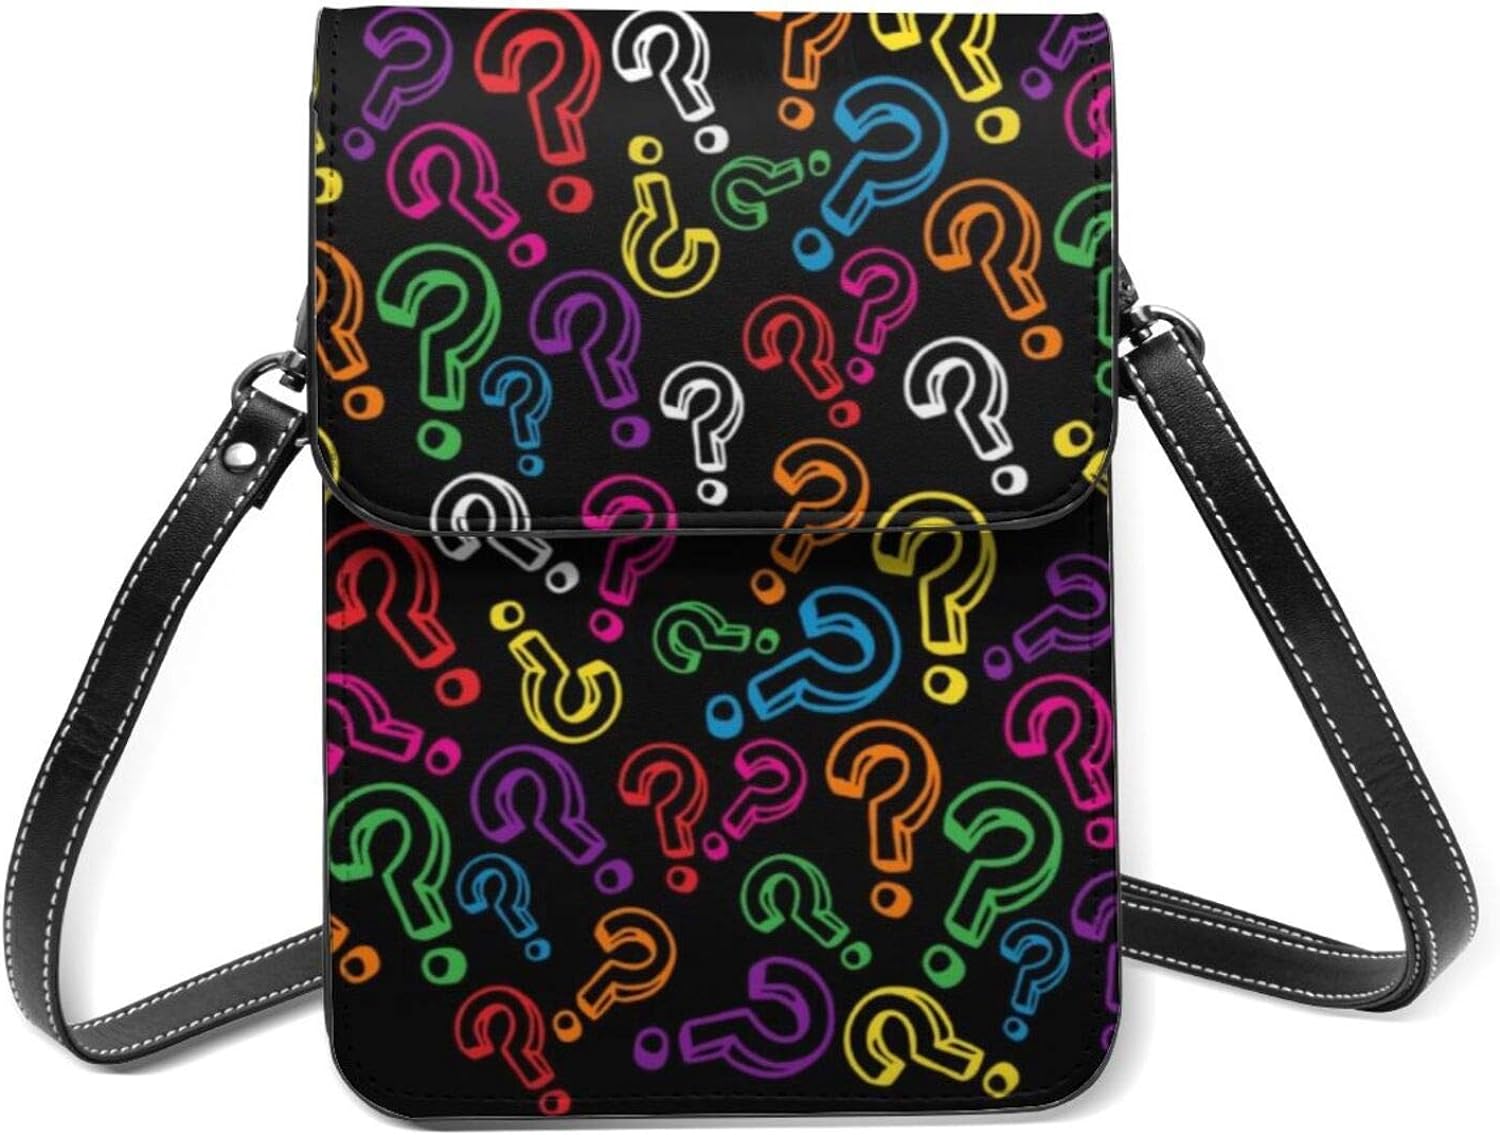 Purse with a question mark.